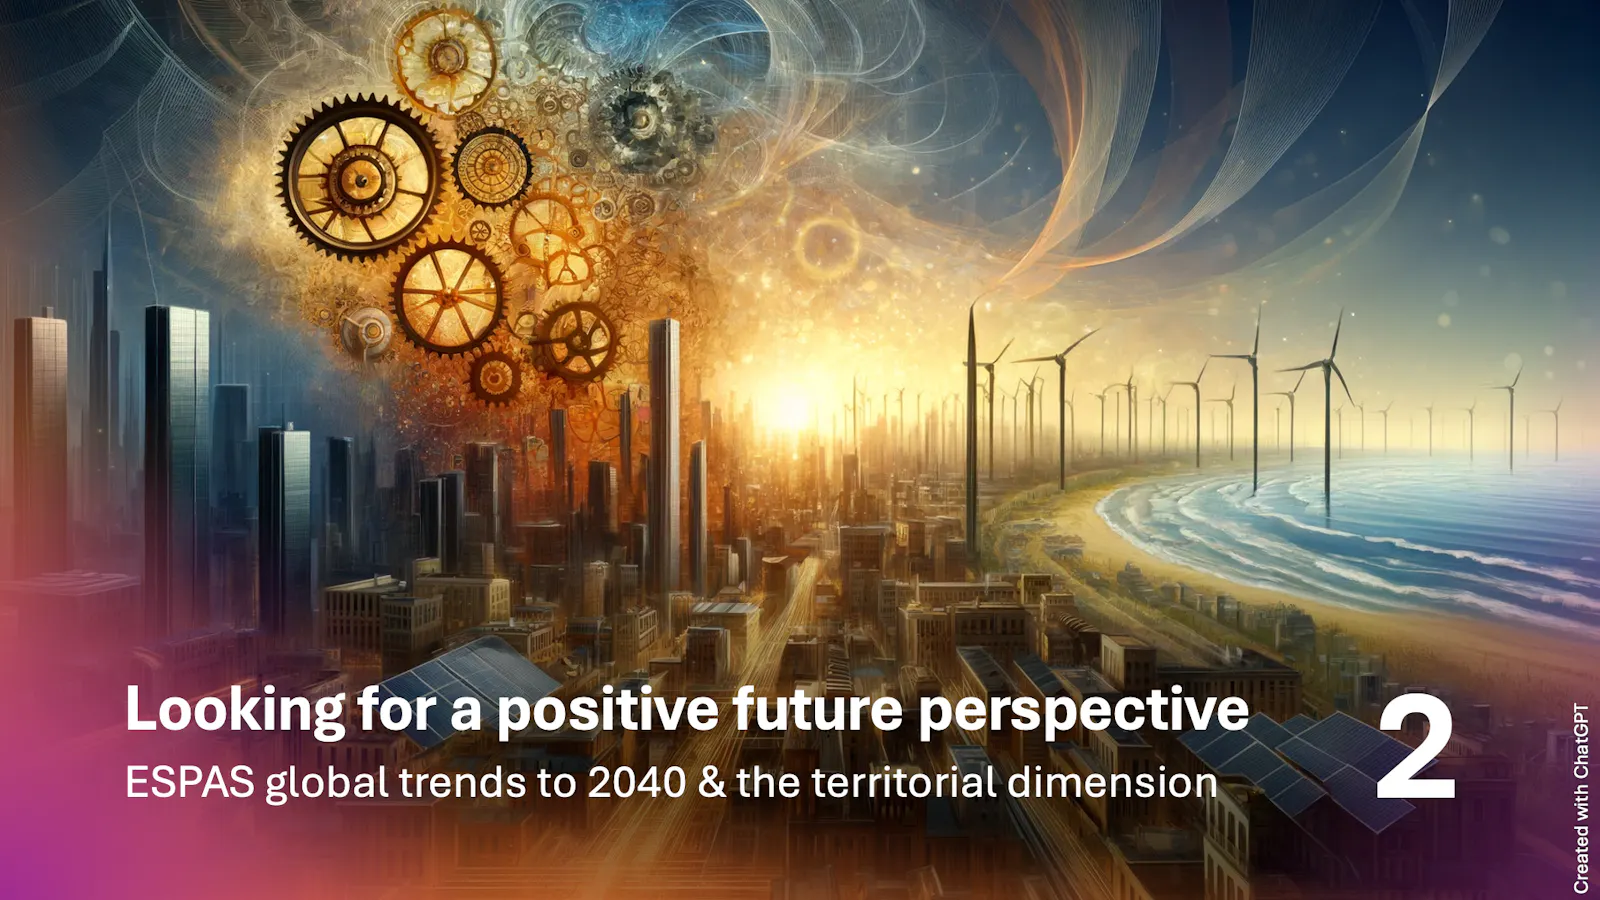 Looking for a positive future perspective. ESPAS global trens to 2040 & their territorial dimension. Part 2.